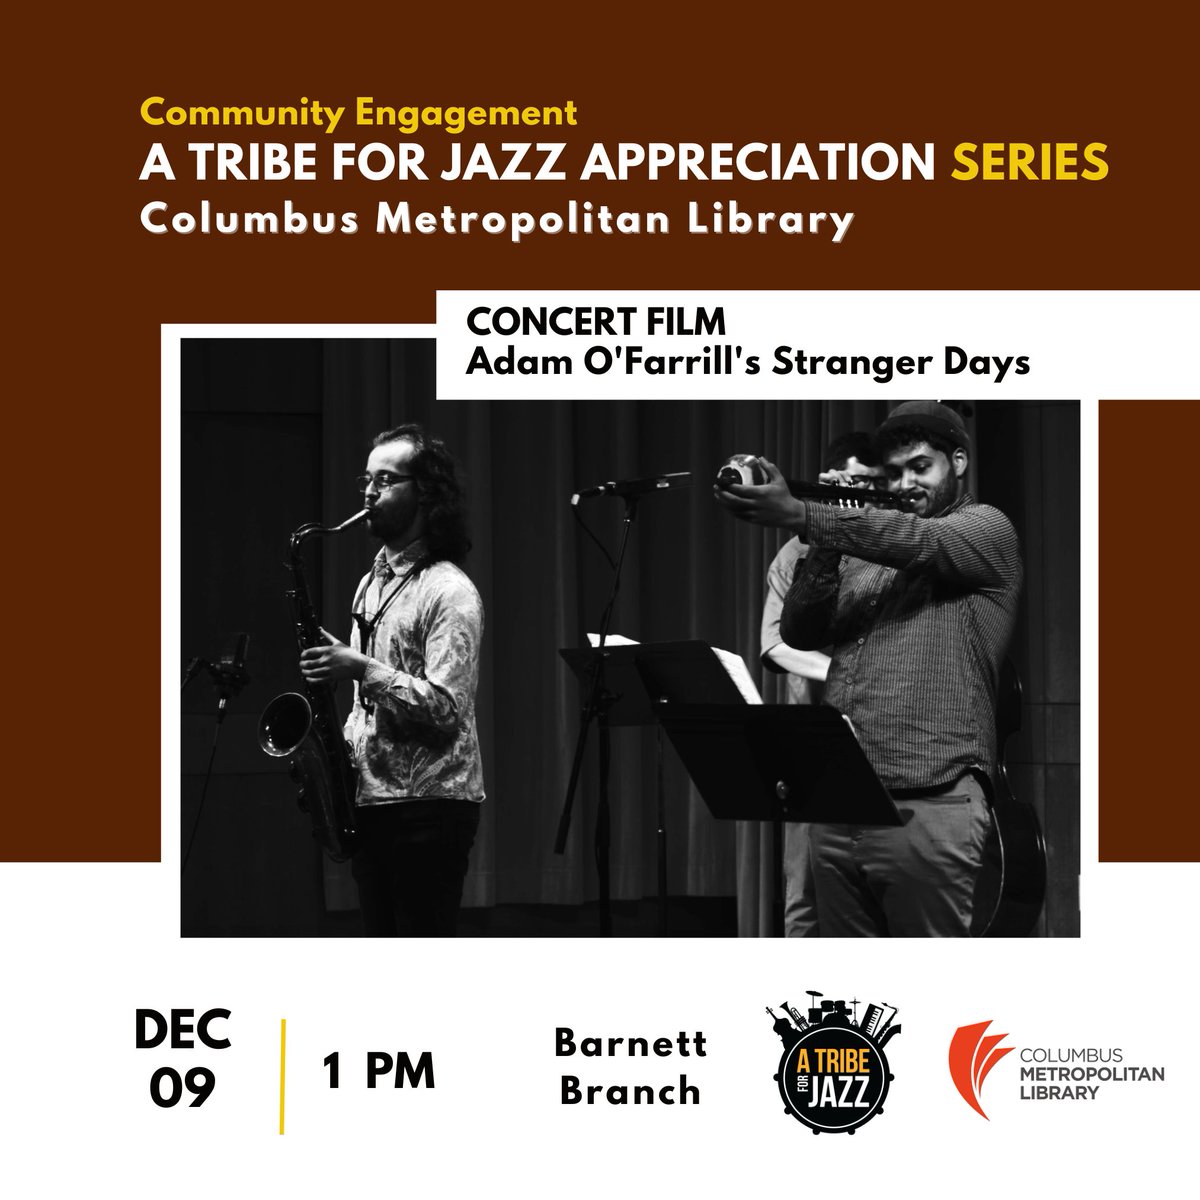 Join us and A Tribe For Jazz for our Jazz Appreciation Series at our Barnett Branch this Saturday at 1 p.m. We hope to see you there! 🎷